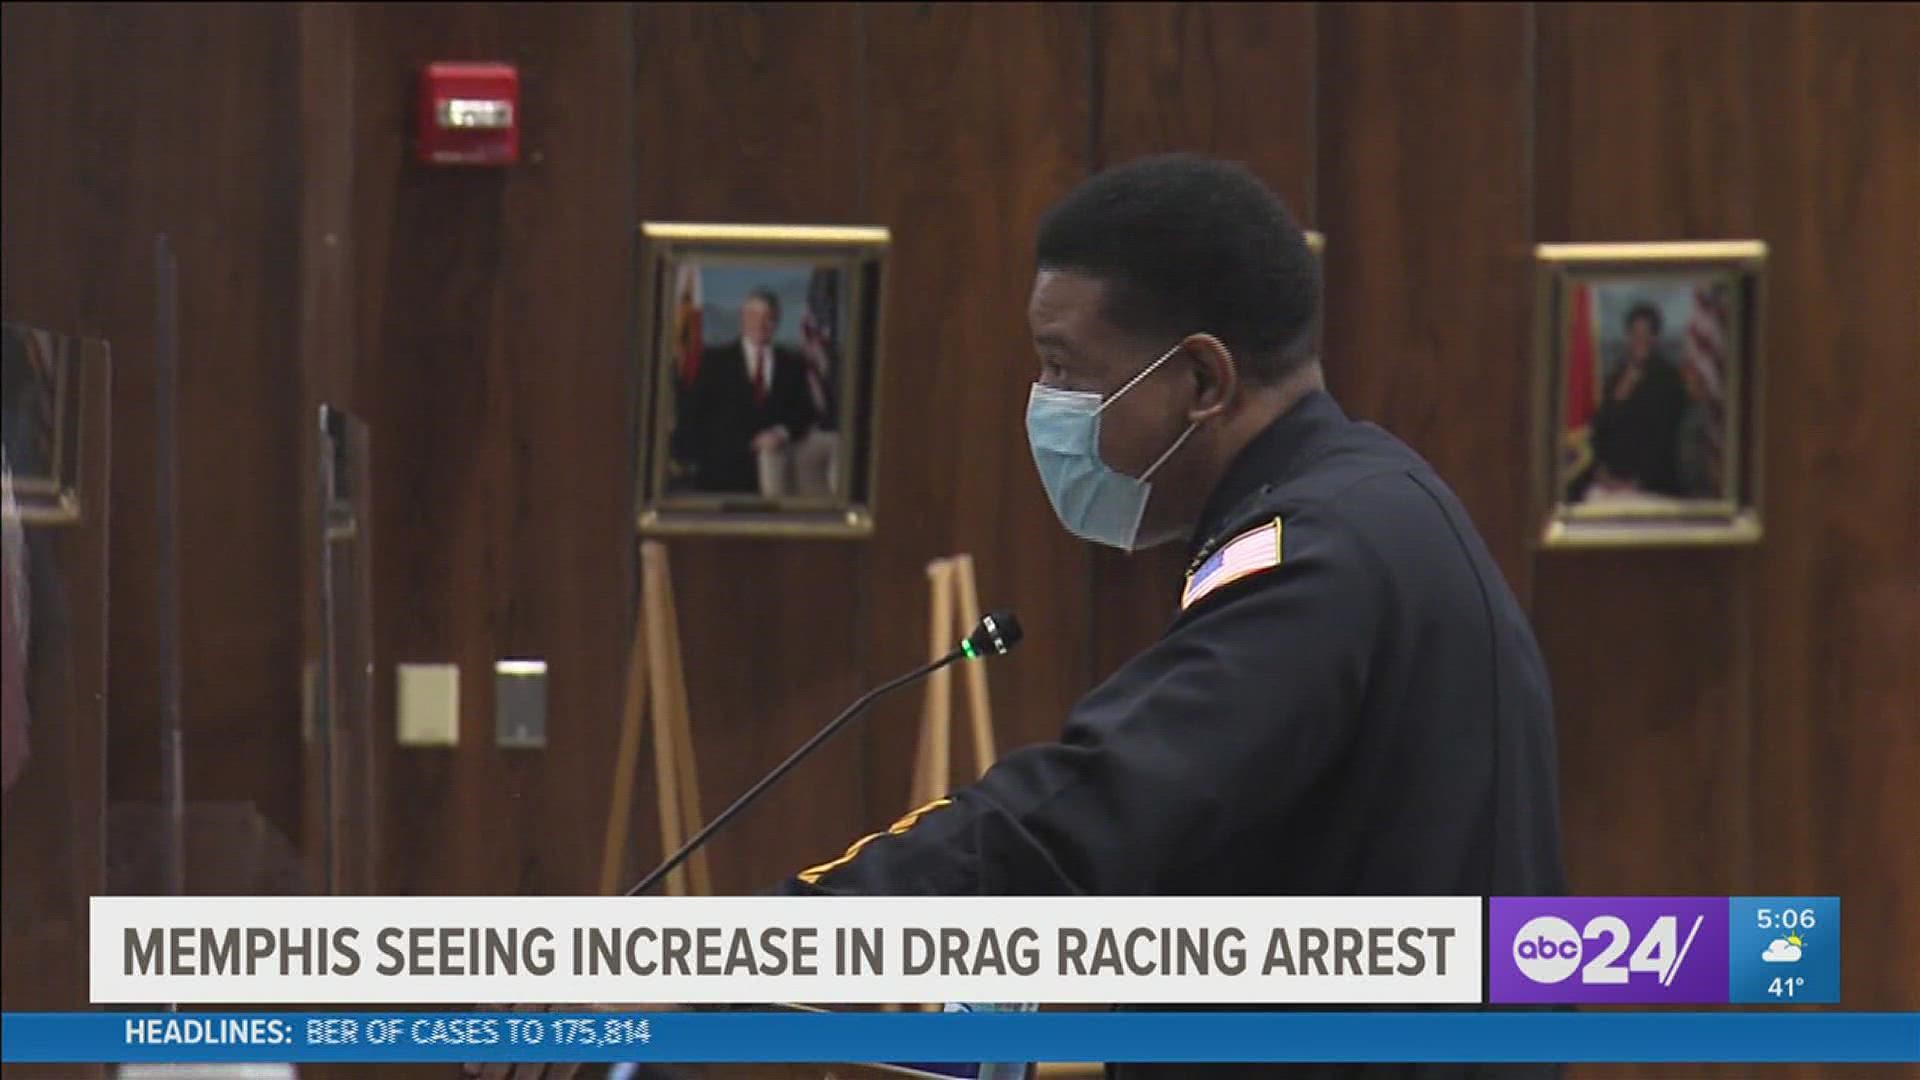 Memphis Police told the council Tuesday there were 45 more drag racing charges in 2021 compared to 2020.